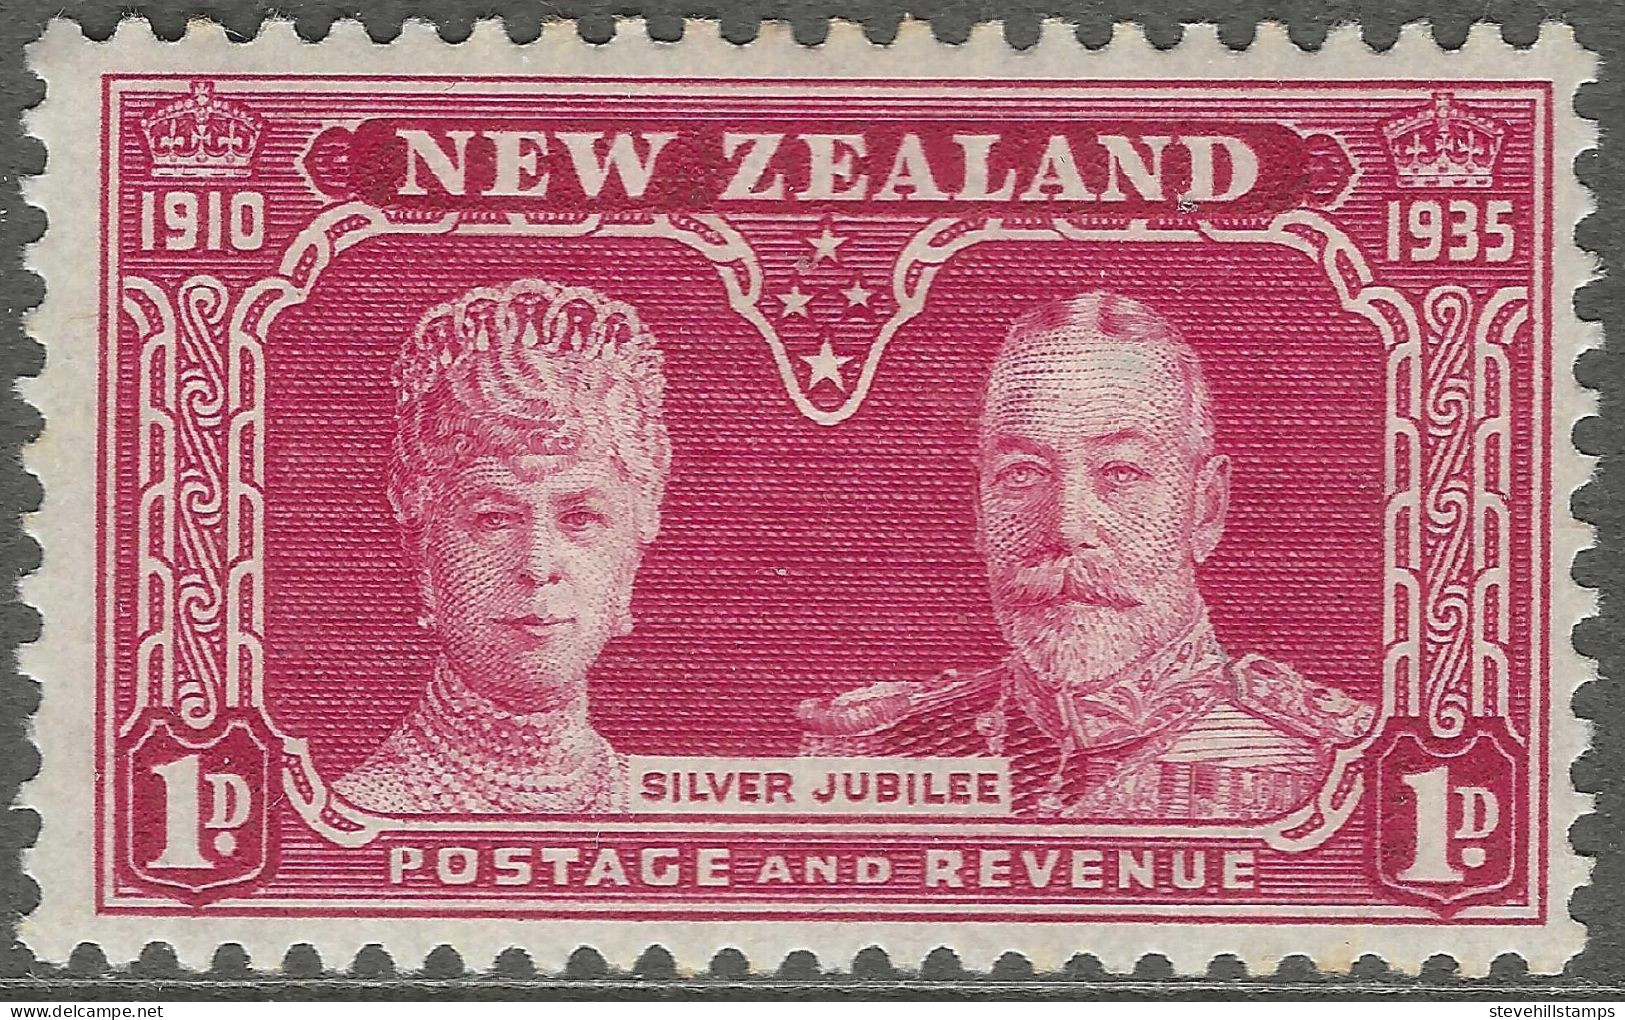 New Zealand. 1935 KGV Silver Jubilee. 1d MH. SG 574 - Unused Stamps